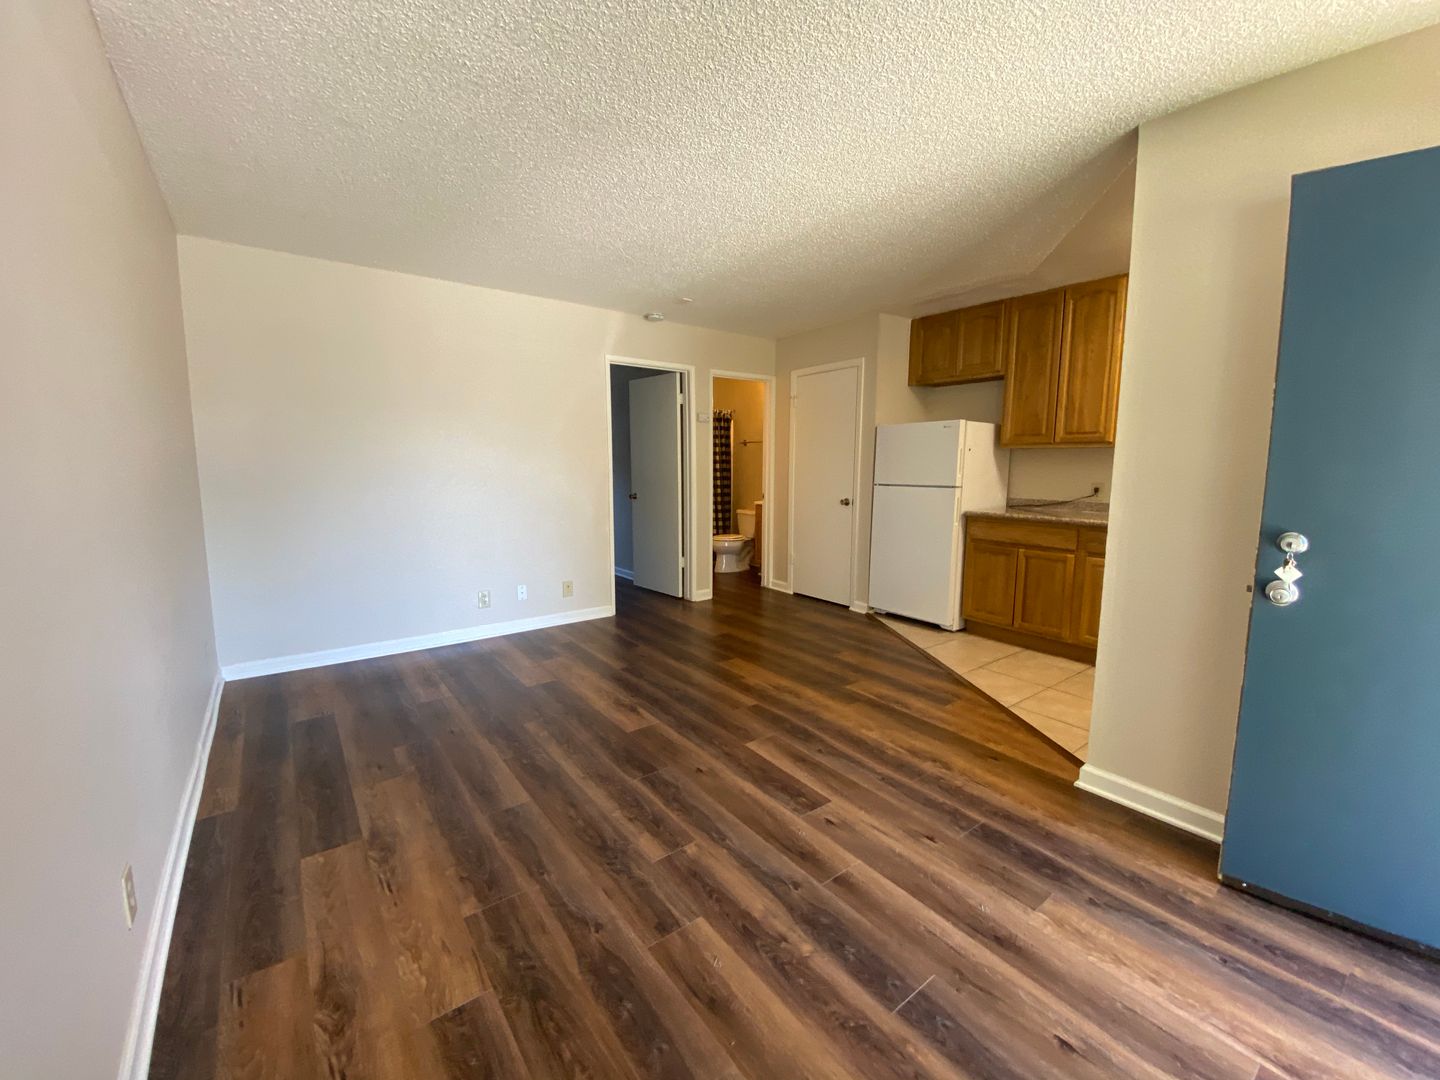 1 Bed / 1 Bath | Downstairs Apartment in Oak Park Available